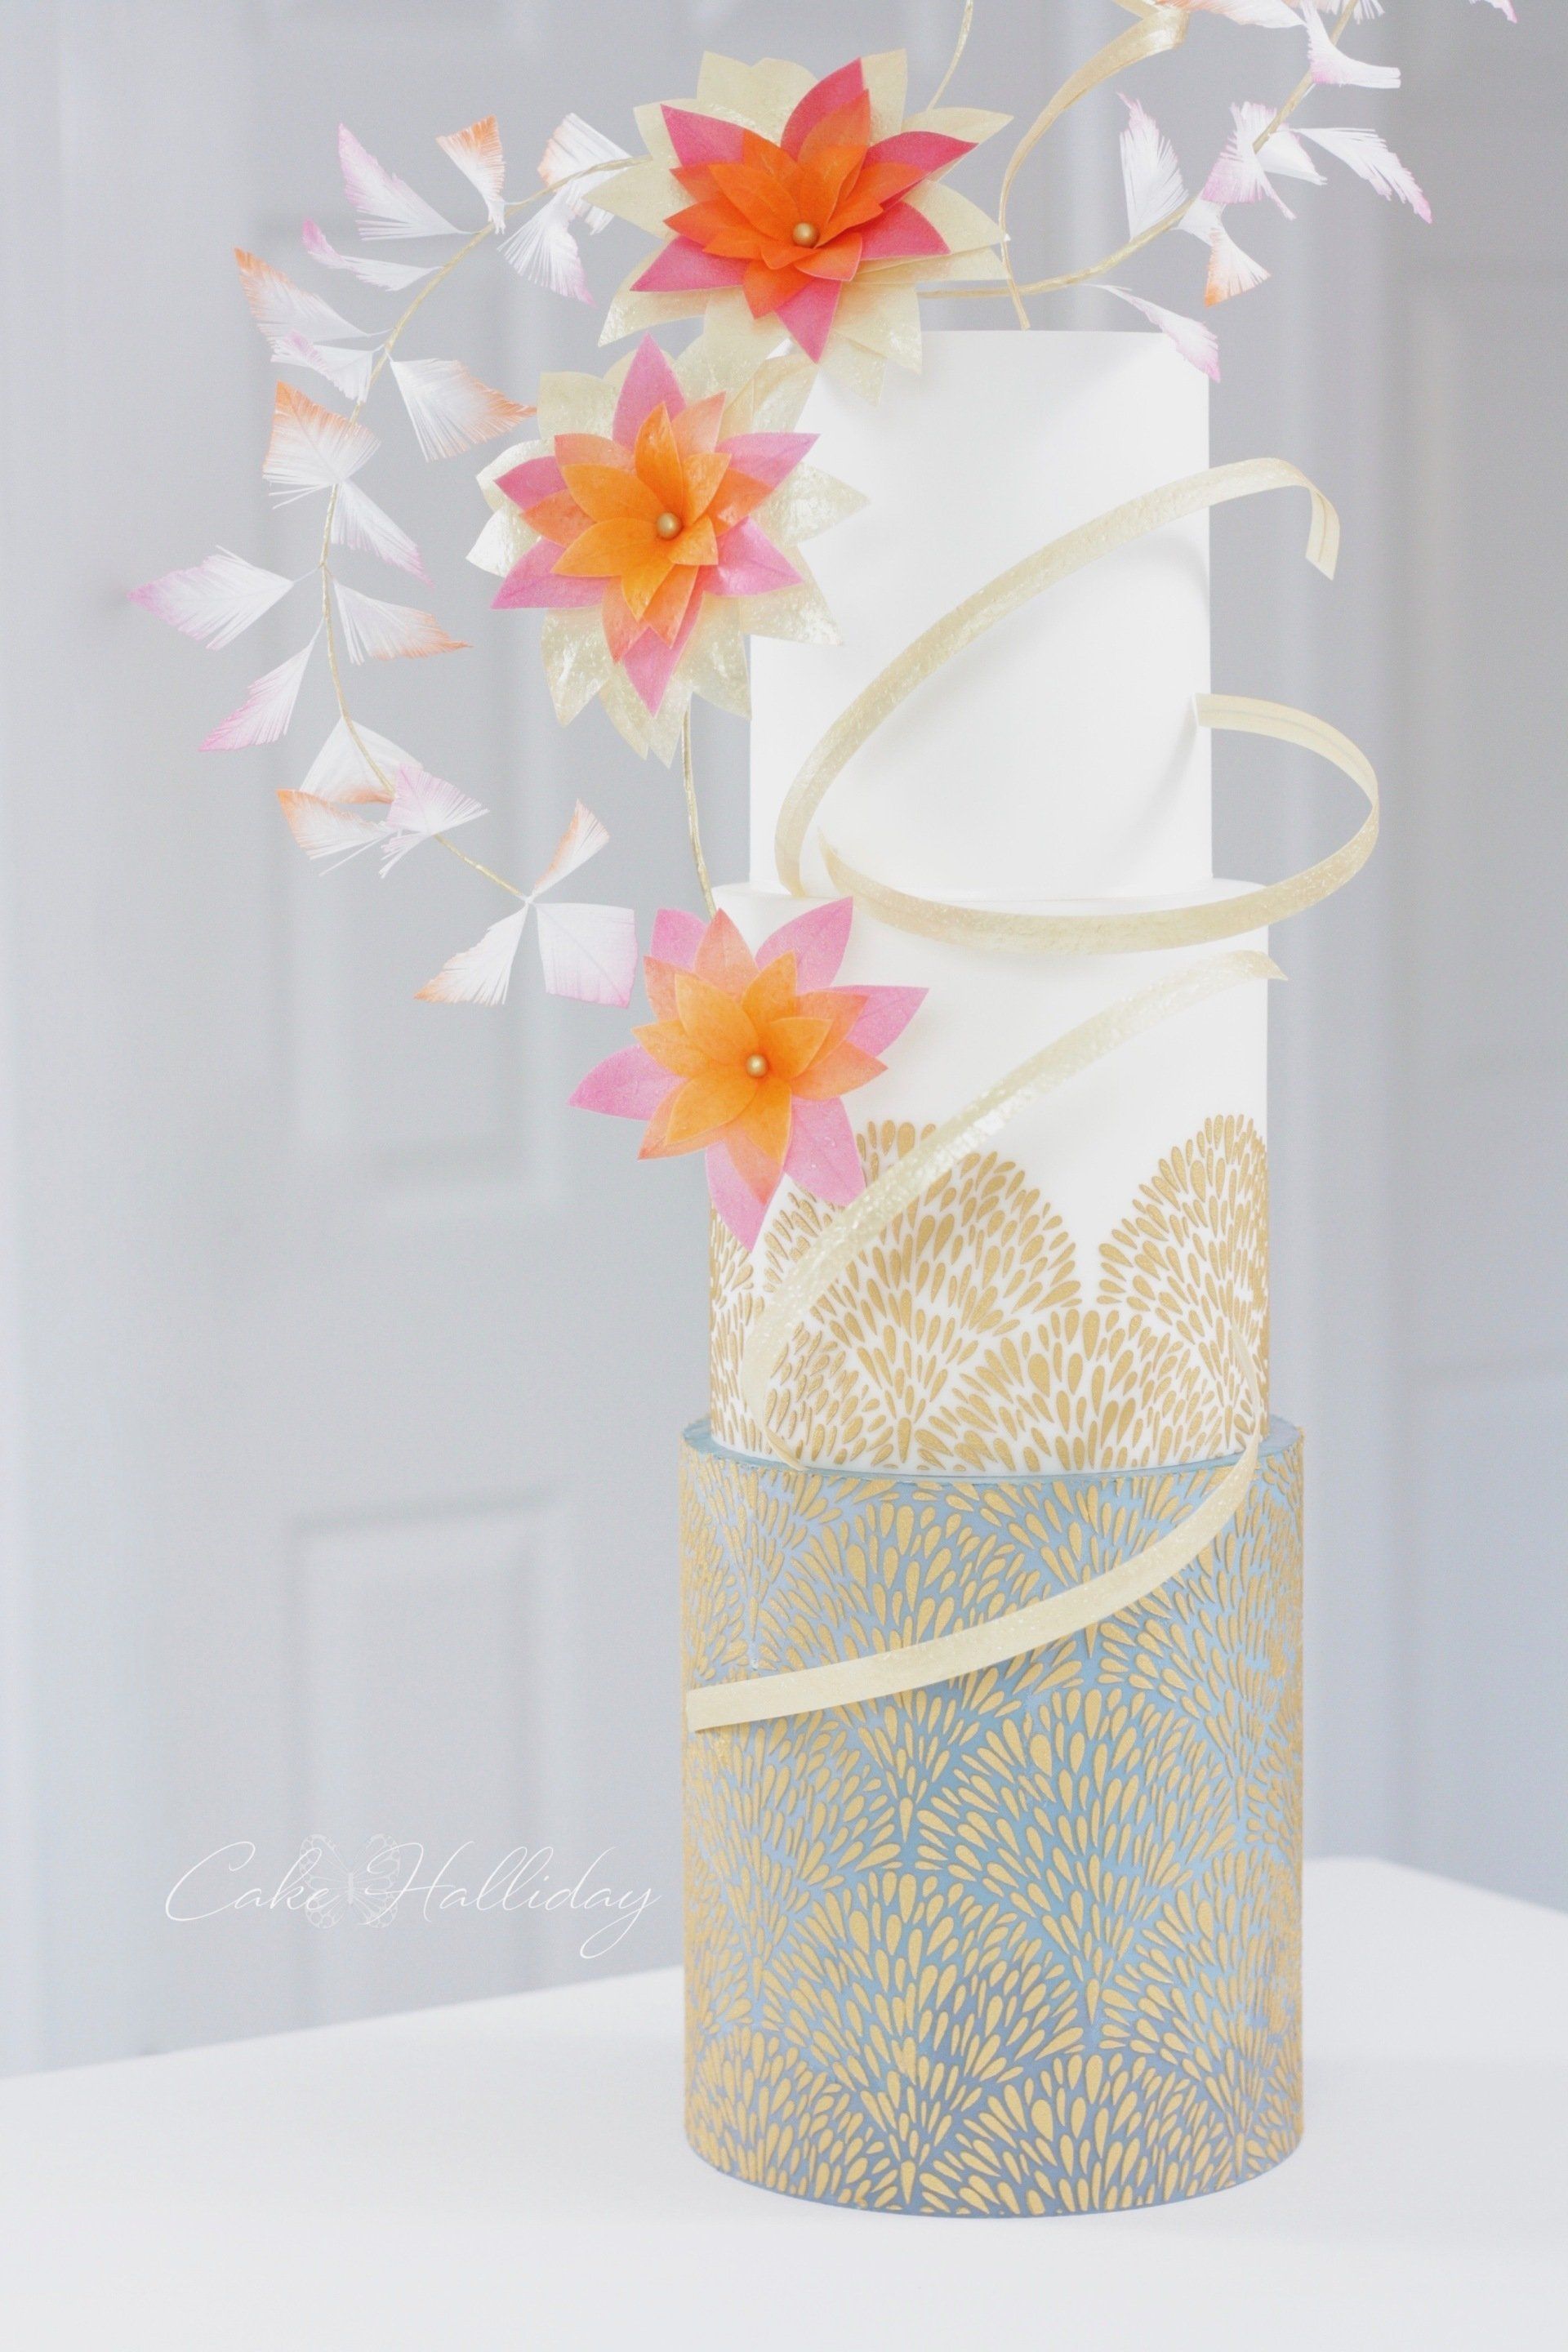 Wafer paper flowers and fan stencil wedding cake